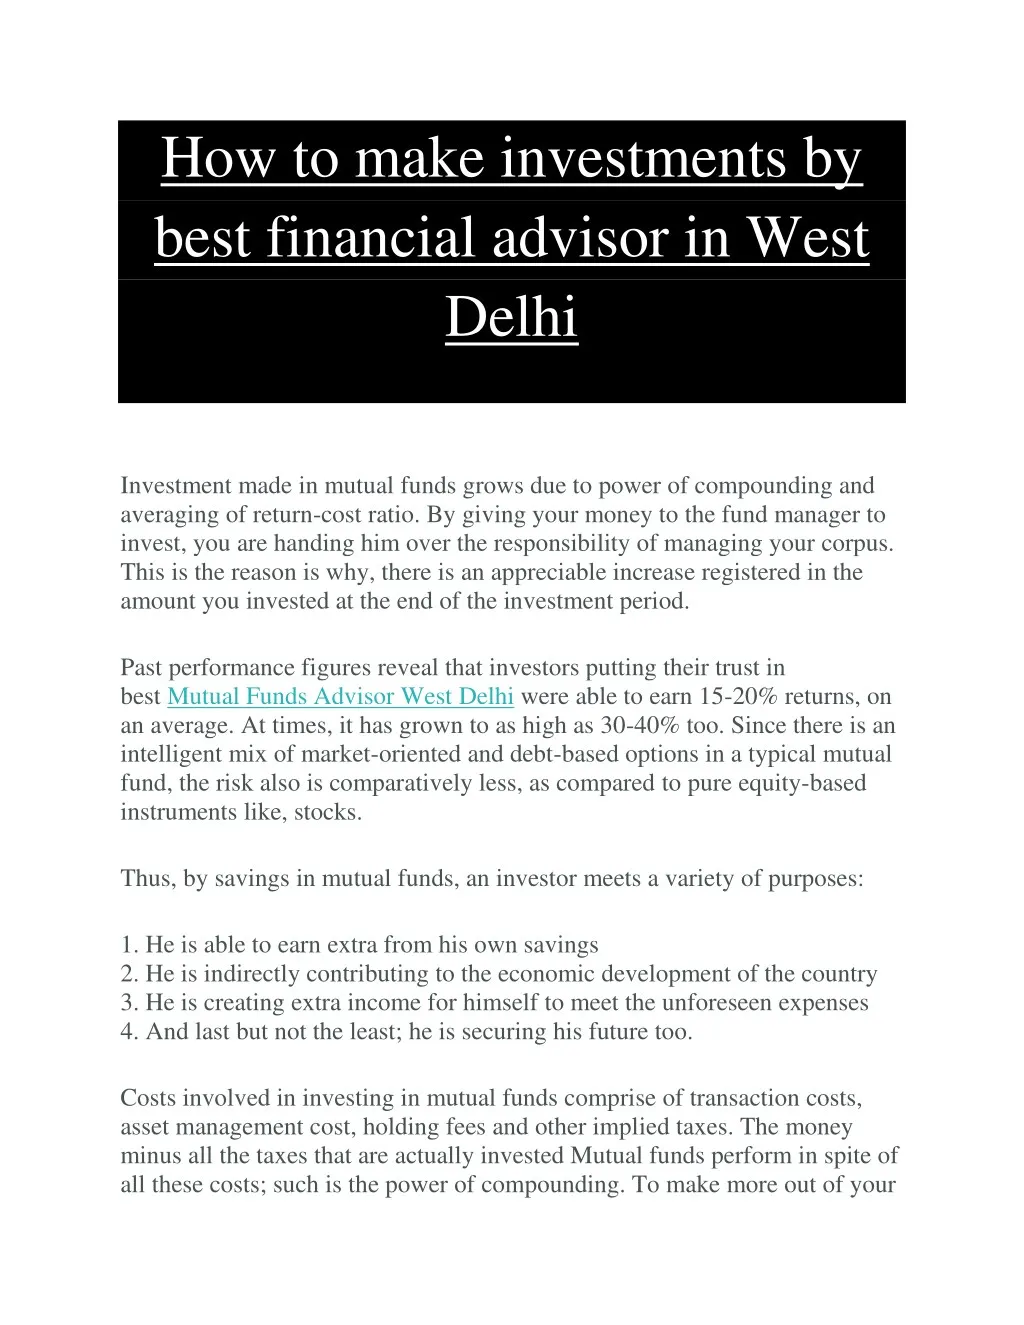 how to make investments by best financial advisor